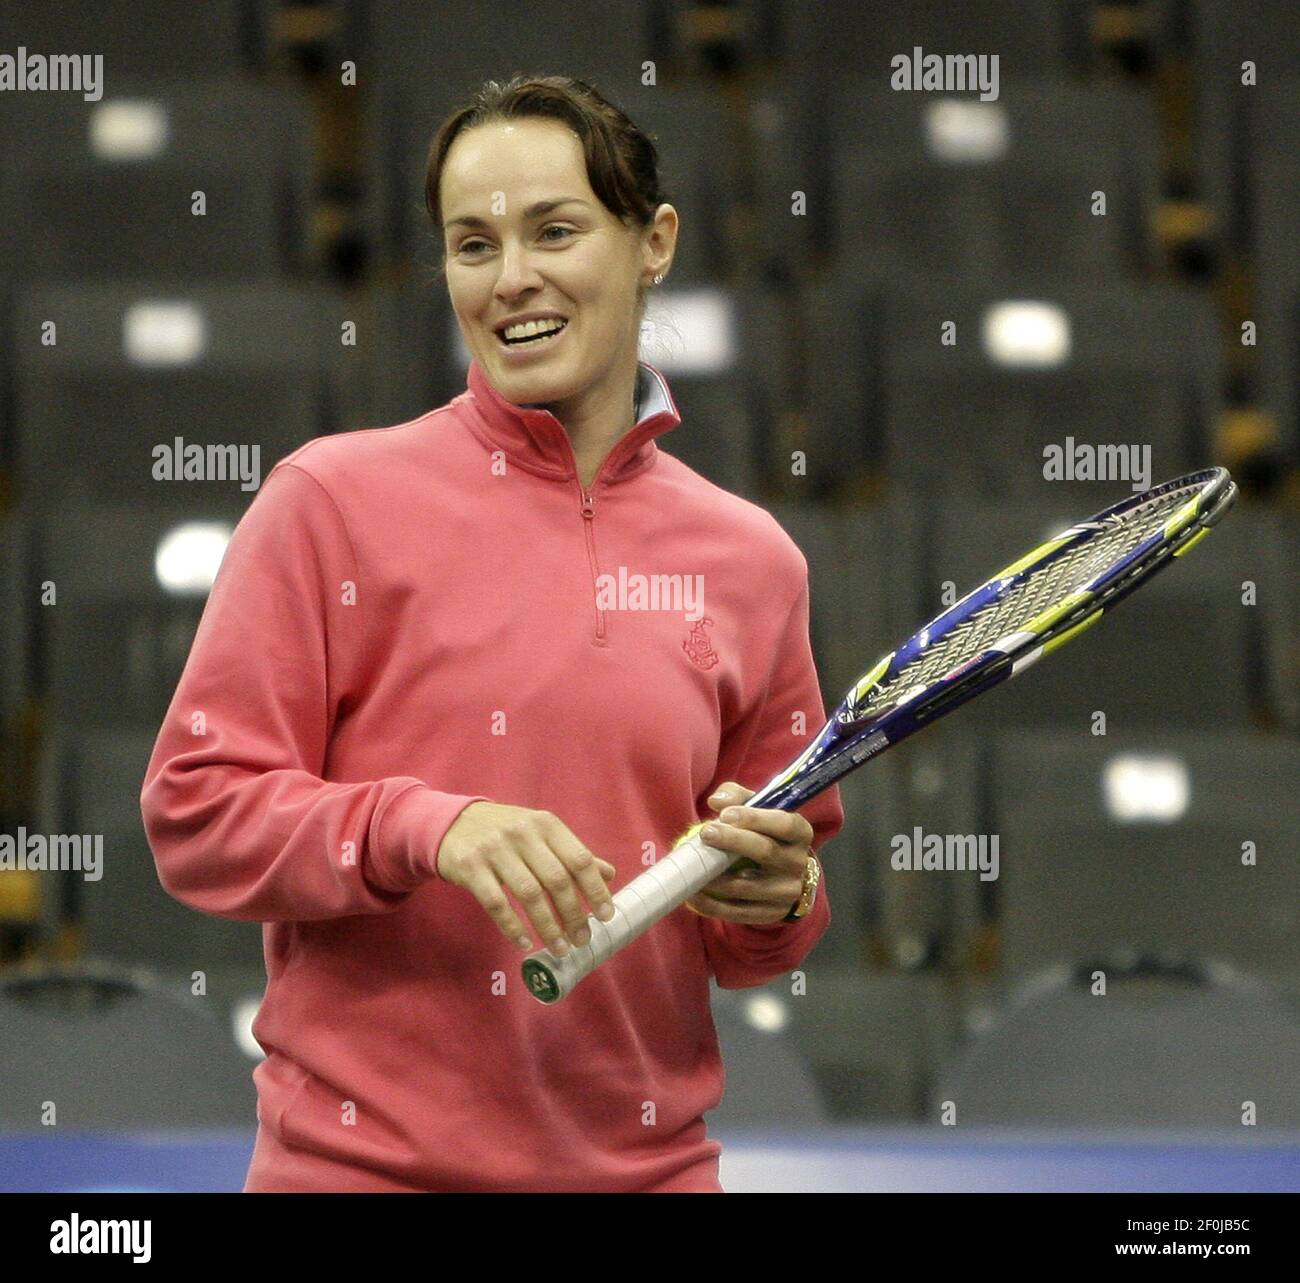 Martina Hingis of the New York Buzz warms up before World Team Tennis  action against the Philadelphia Freedoms at The Pavilion on Wednesday, July  21, 2010. (Photo by Yong Kim/Philadelphia Daily News/MCT/Sipa